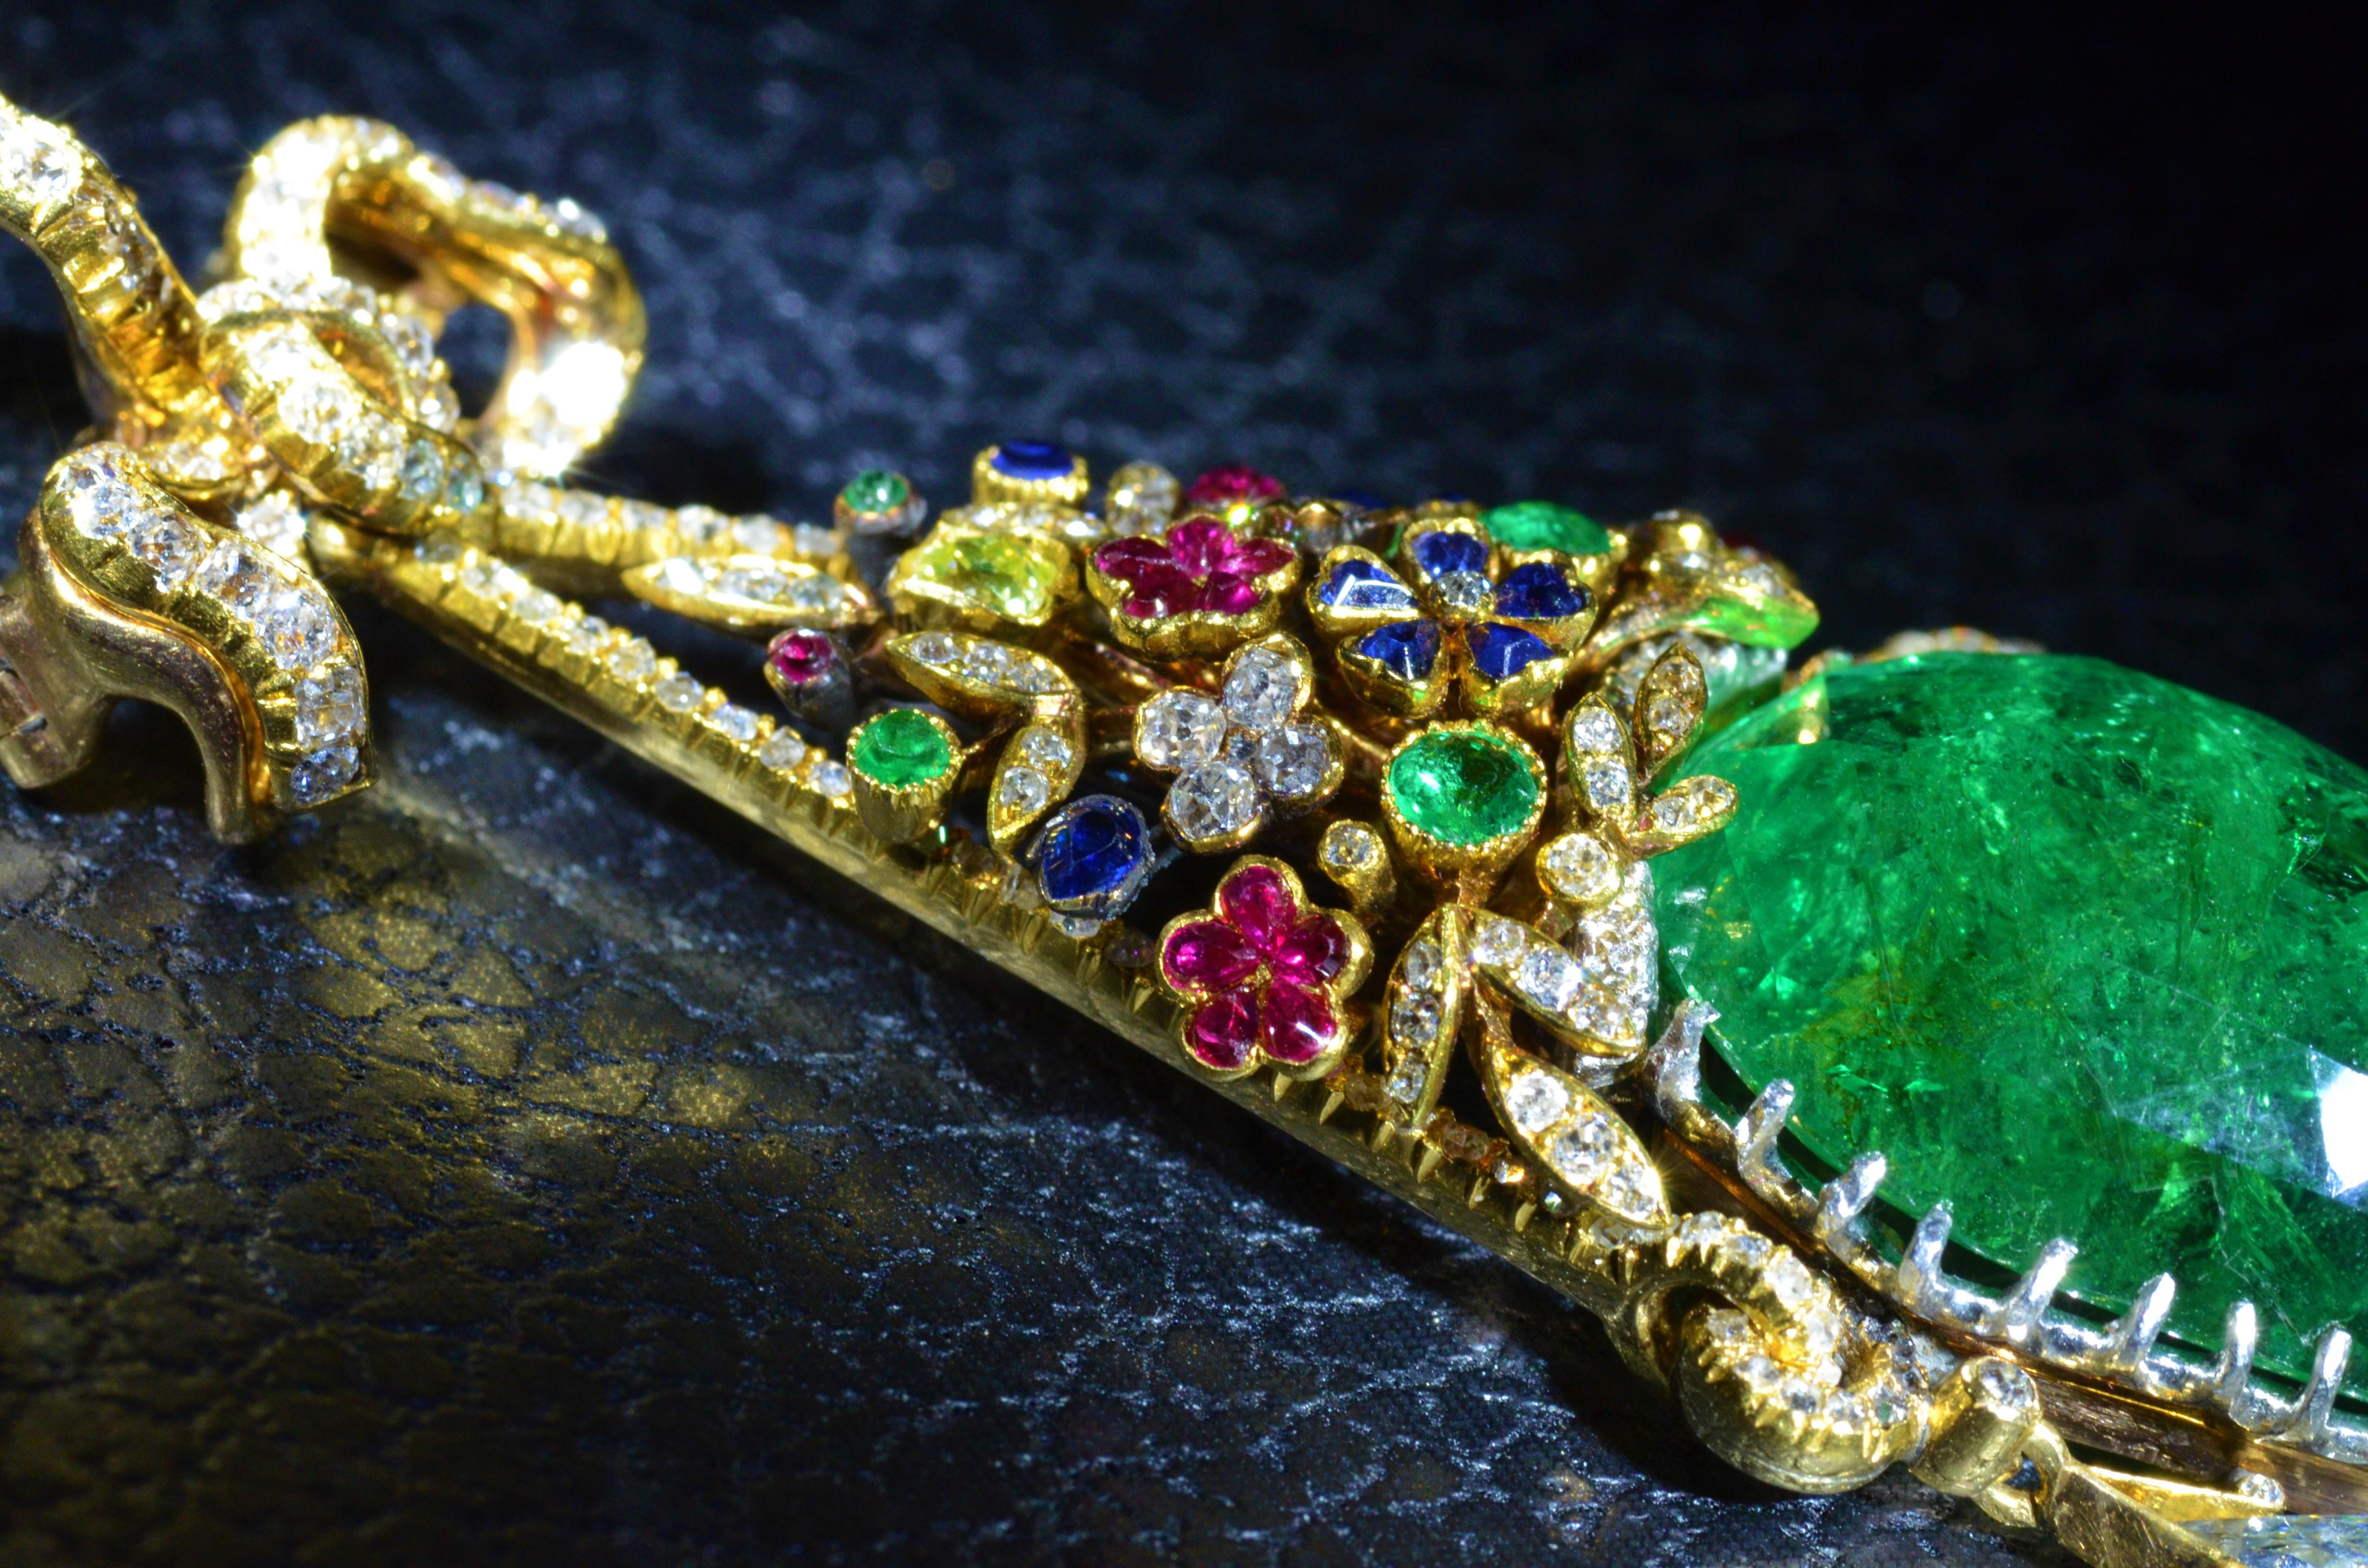 Outstanding Multi-Gem Pendant Brooch by Frederic Boucheron featuring an old mine cut and rose-cut diamond ribbon-bow, suspending a floral bouquet of variously-cut sapphires, rubies, emeralds and an old-cut yellow diamond.  Below an important pear